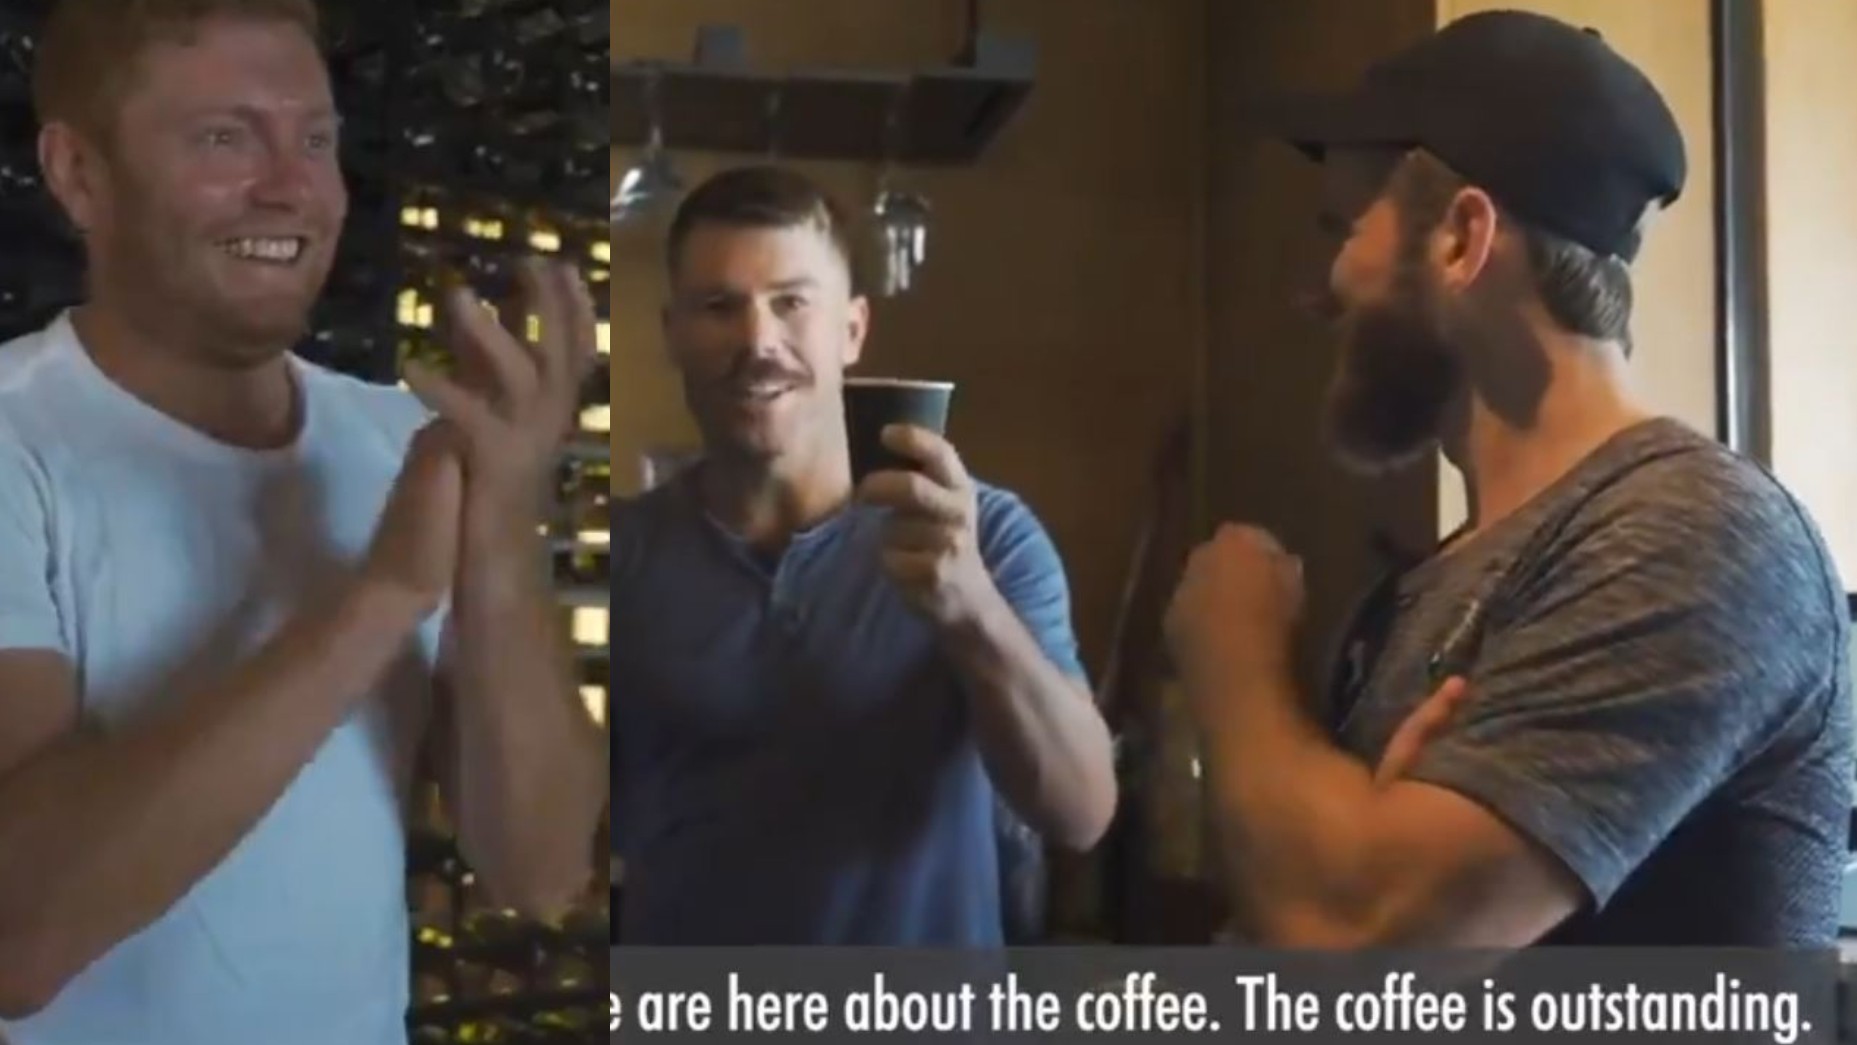 IPL 2020: WATCH- Warner and Bairstow drink “outstanding” coffee made by Williamson